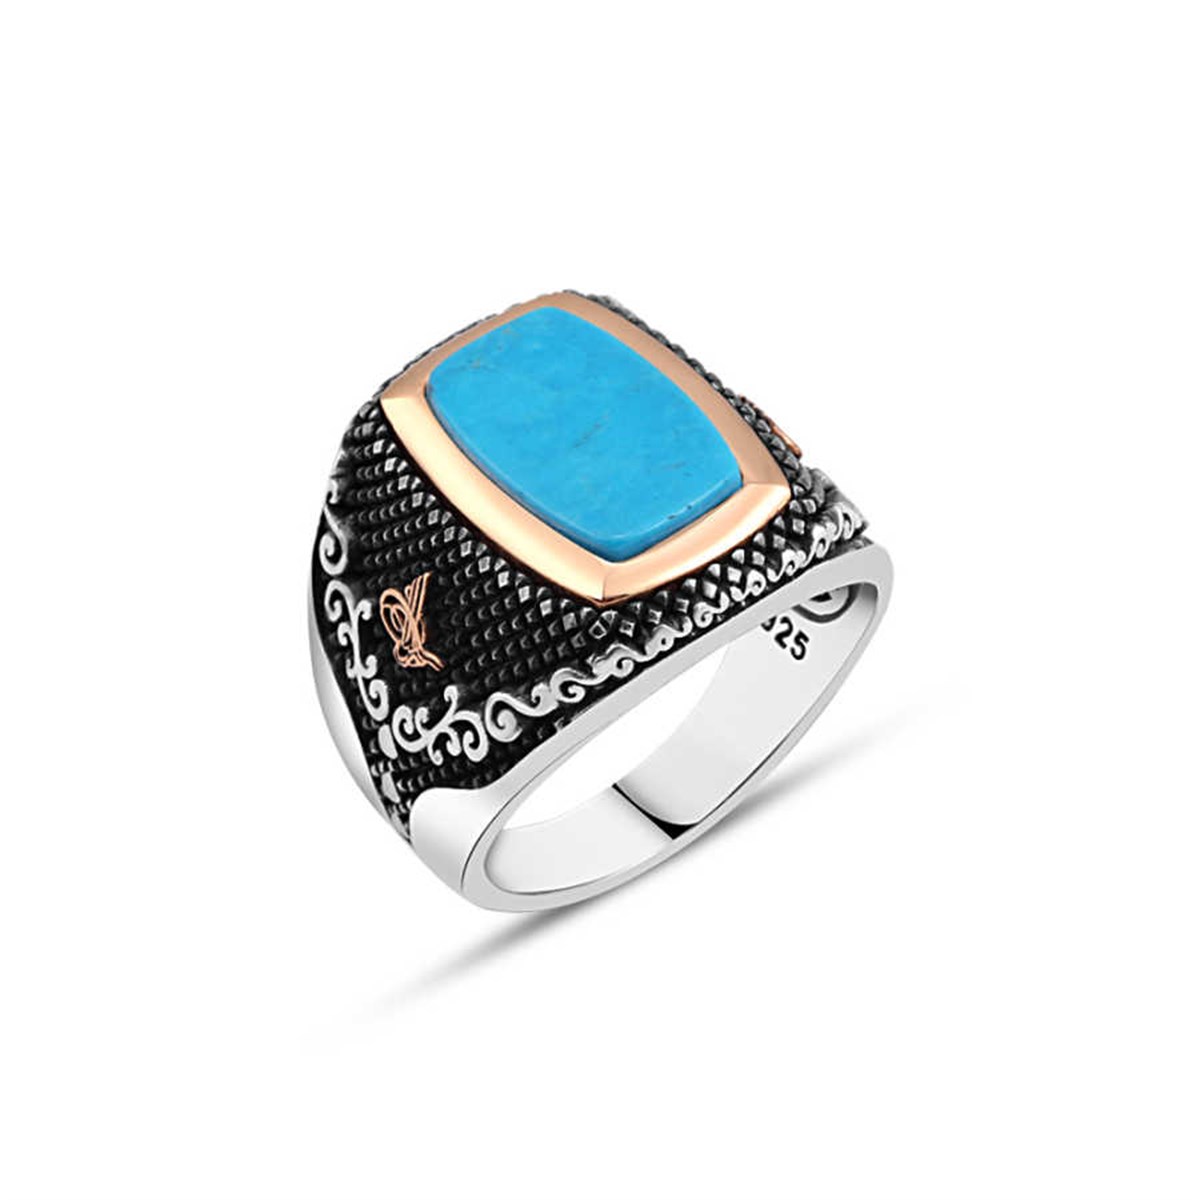 Plain Turquoise Stone Sterling Silver Men's Ring